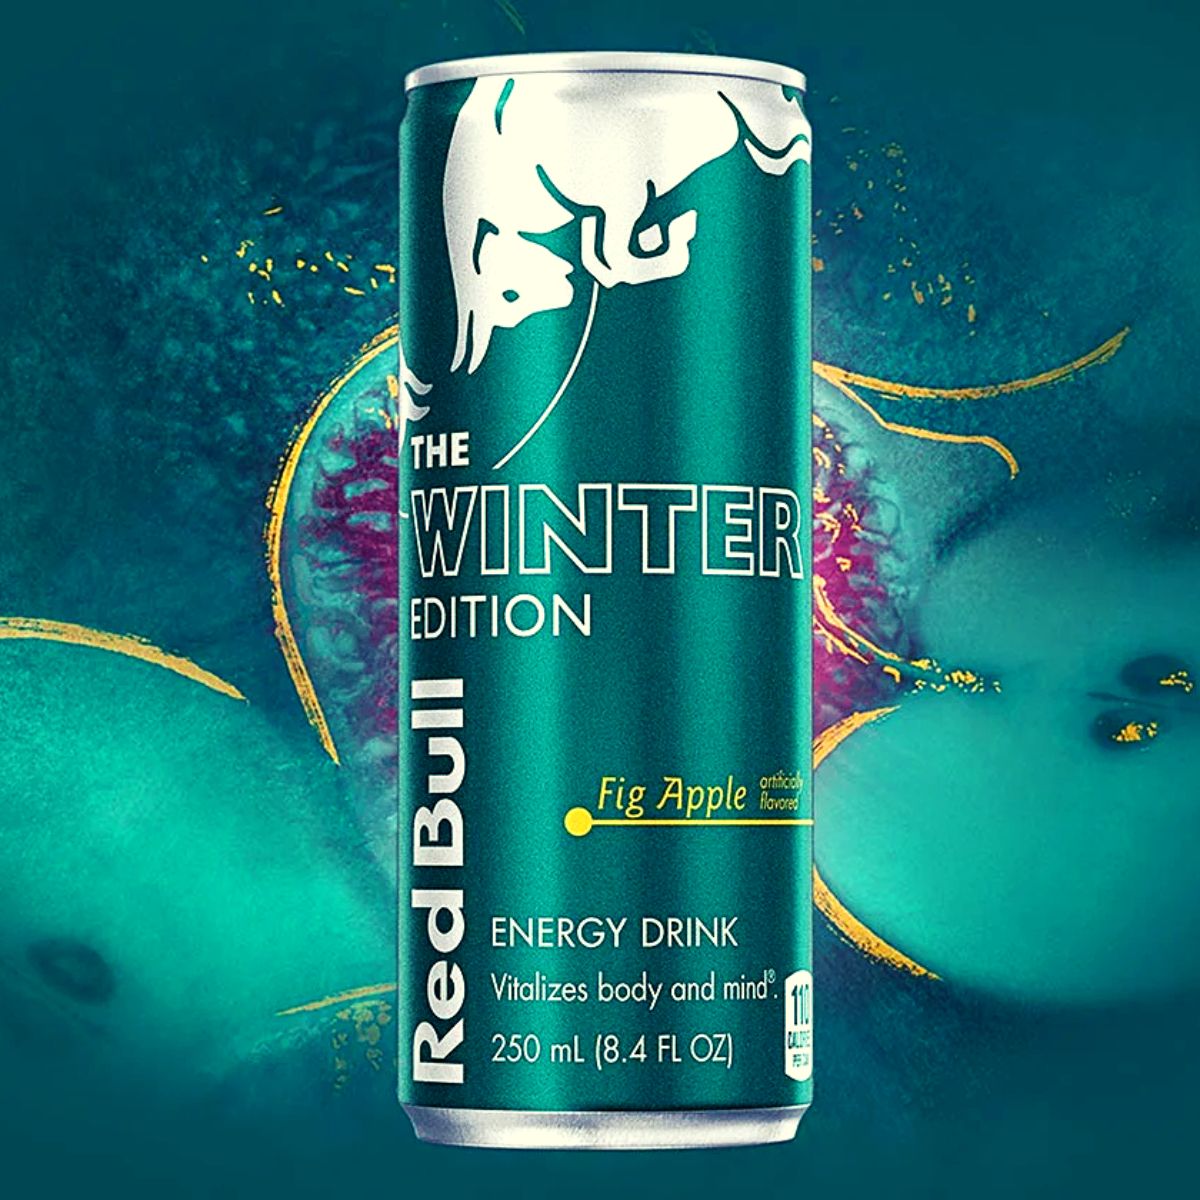 New Red Bull Winter Edition Flavor Will Be Fig Apple Best Price Nutrition